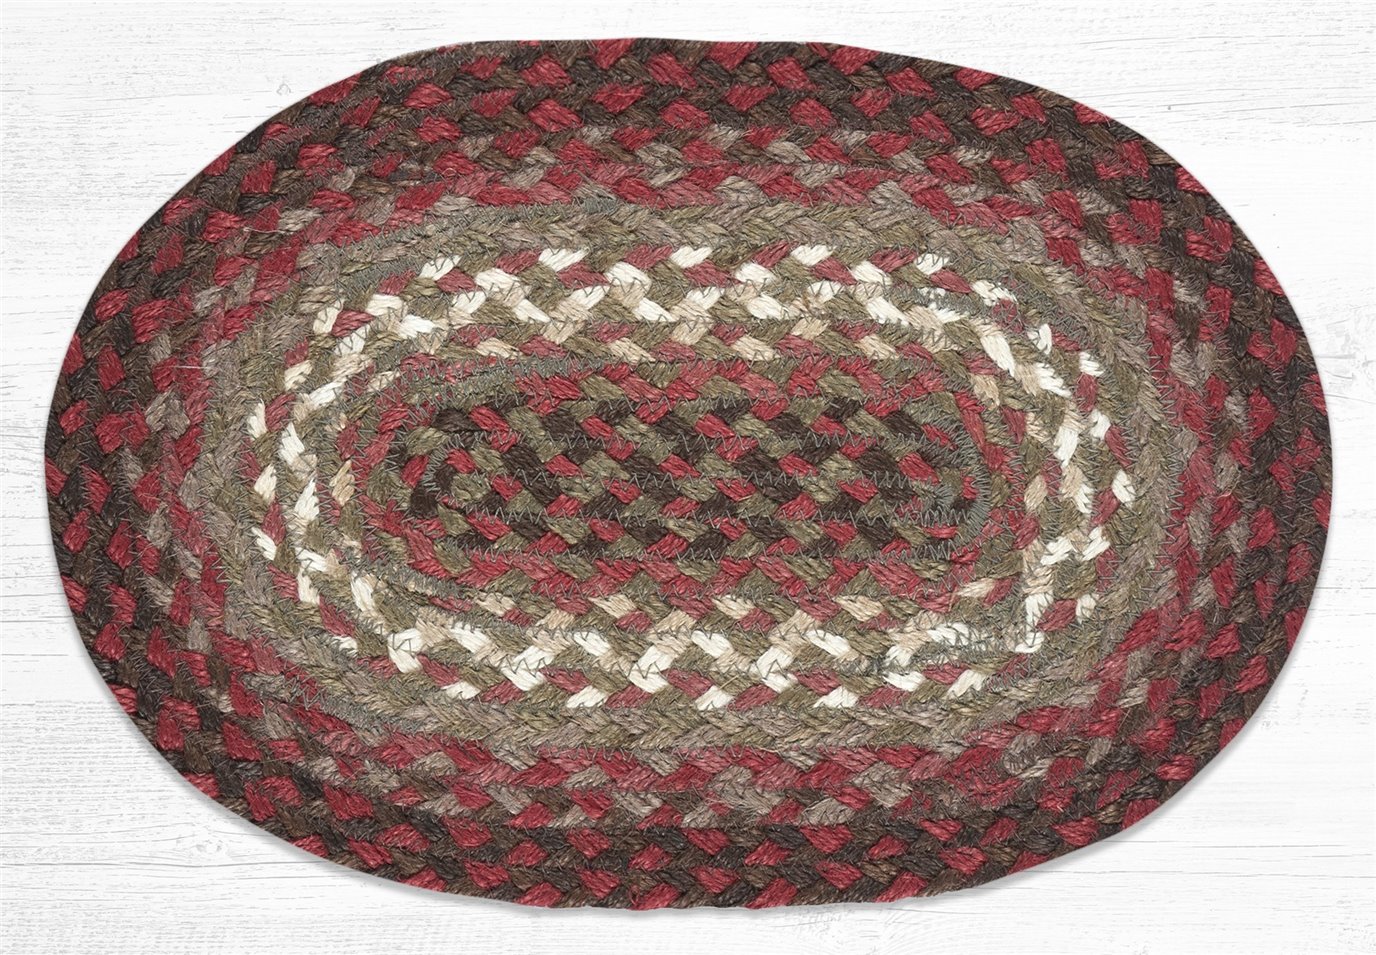 Taupe/Rose/Burgundy Oval Braided Swatch 10"x15"